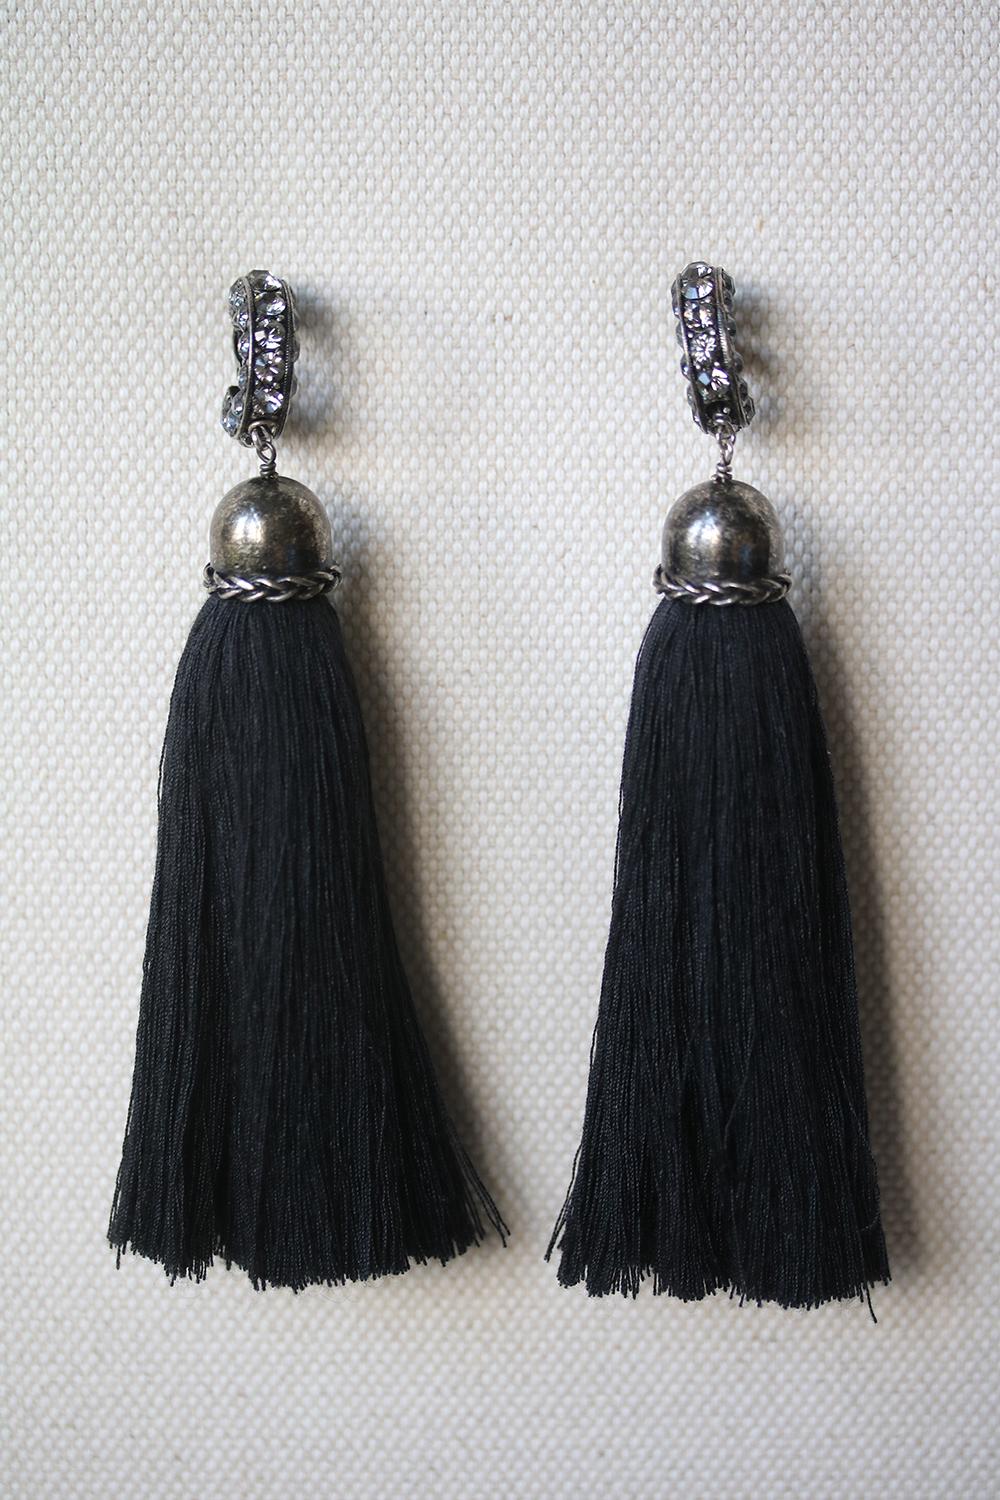 Lanvin's ornamental earrings are a key accessory from the label's collection. Crafted with twisted gunmetal-tone brass clip on hooks and enameled crystals, they are finished with shoulder-grazing navy tassels that swish playfully as you walk. Color: